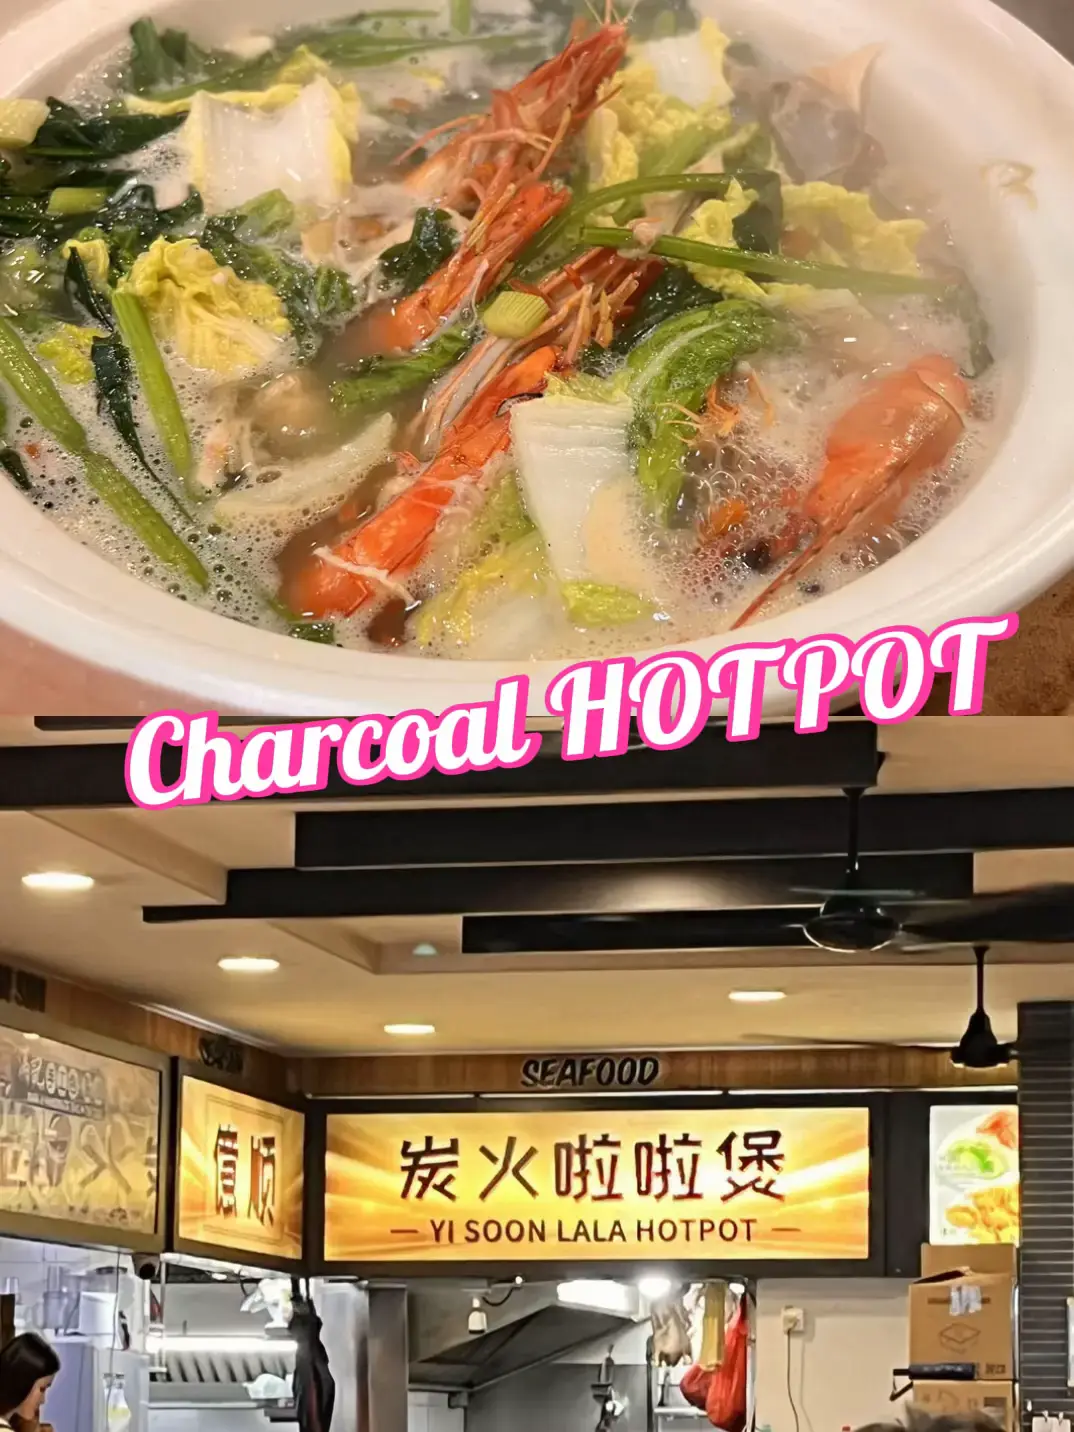 Charcoal hot pot in yishun 😍😍 | Gallery posted by tan jay | Lemon8